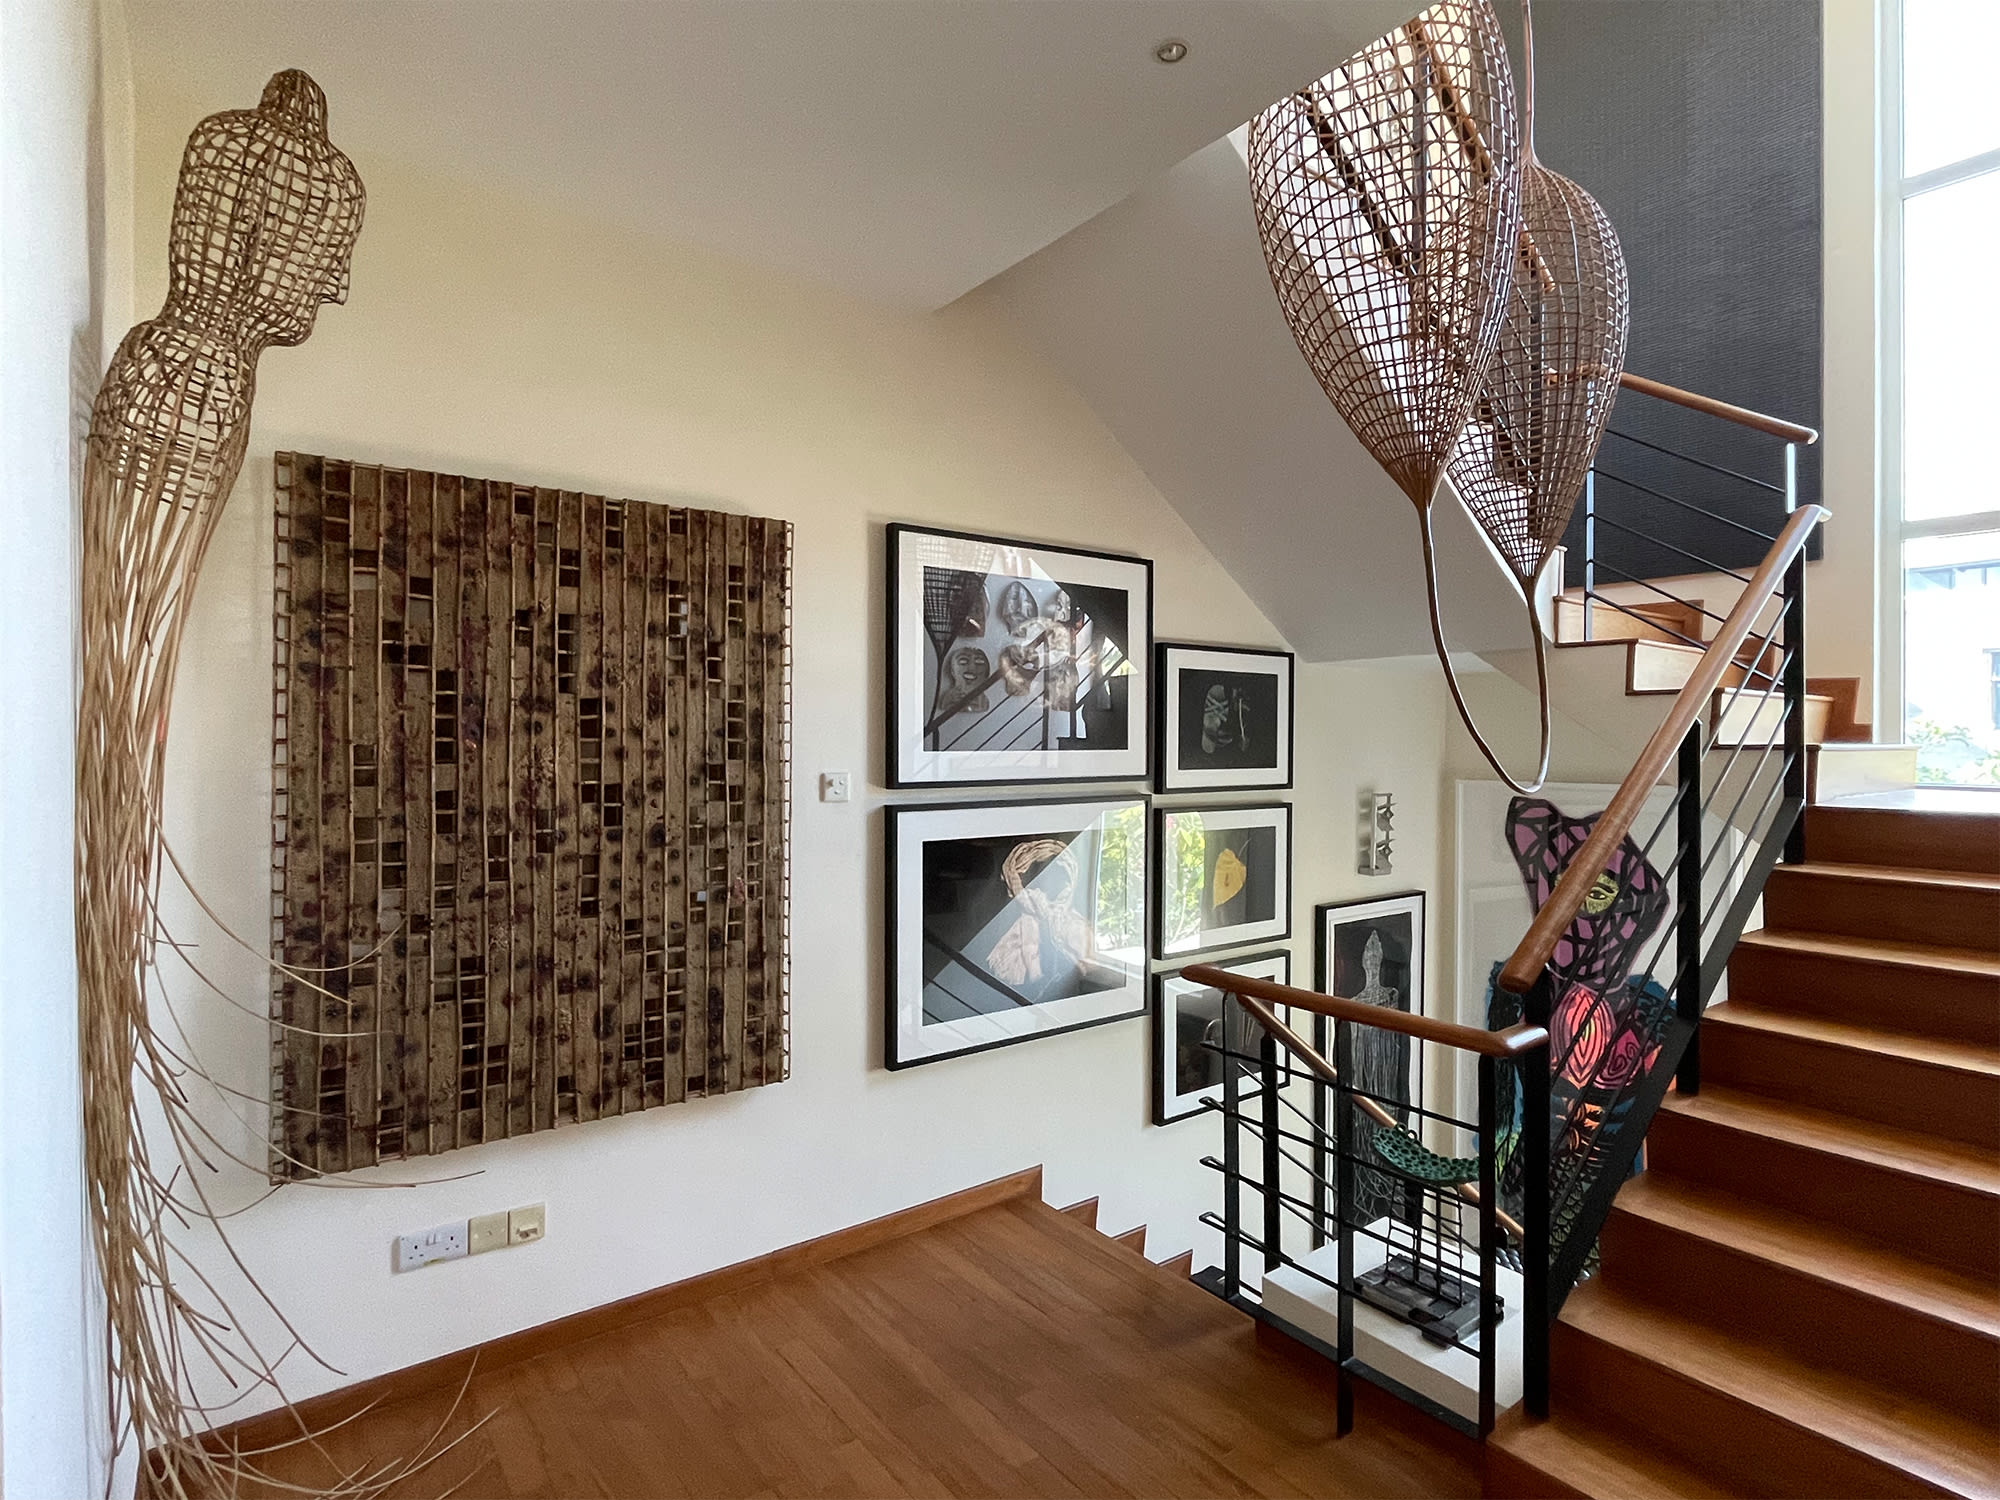 The stairway in Jim Amberson's home, with works by Sopheap Pich and Hak Kim. 